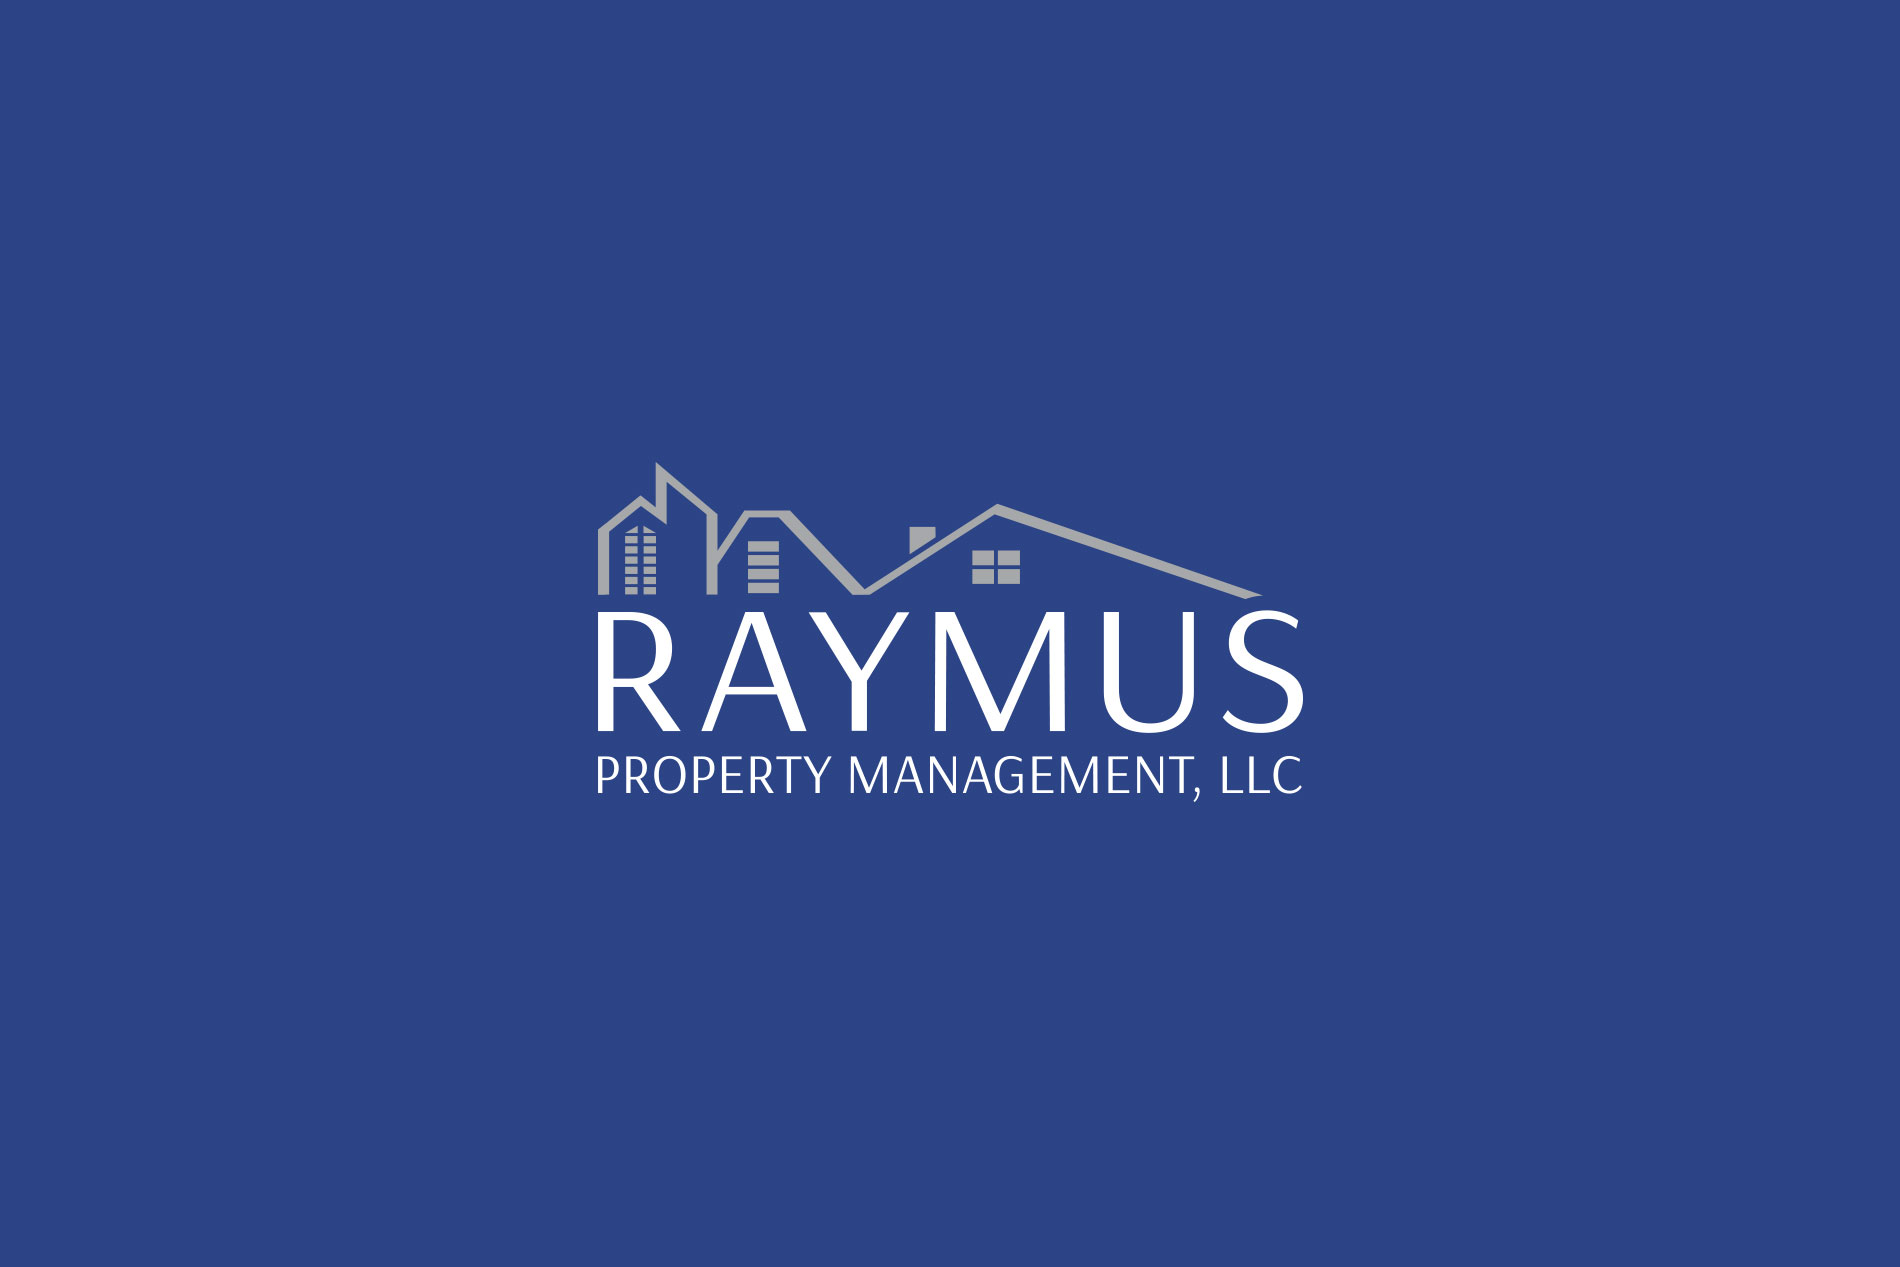 Raymus Property Management